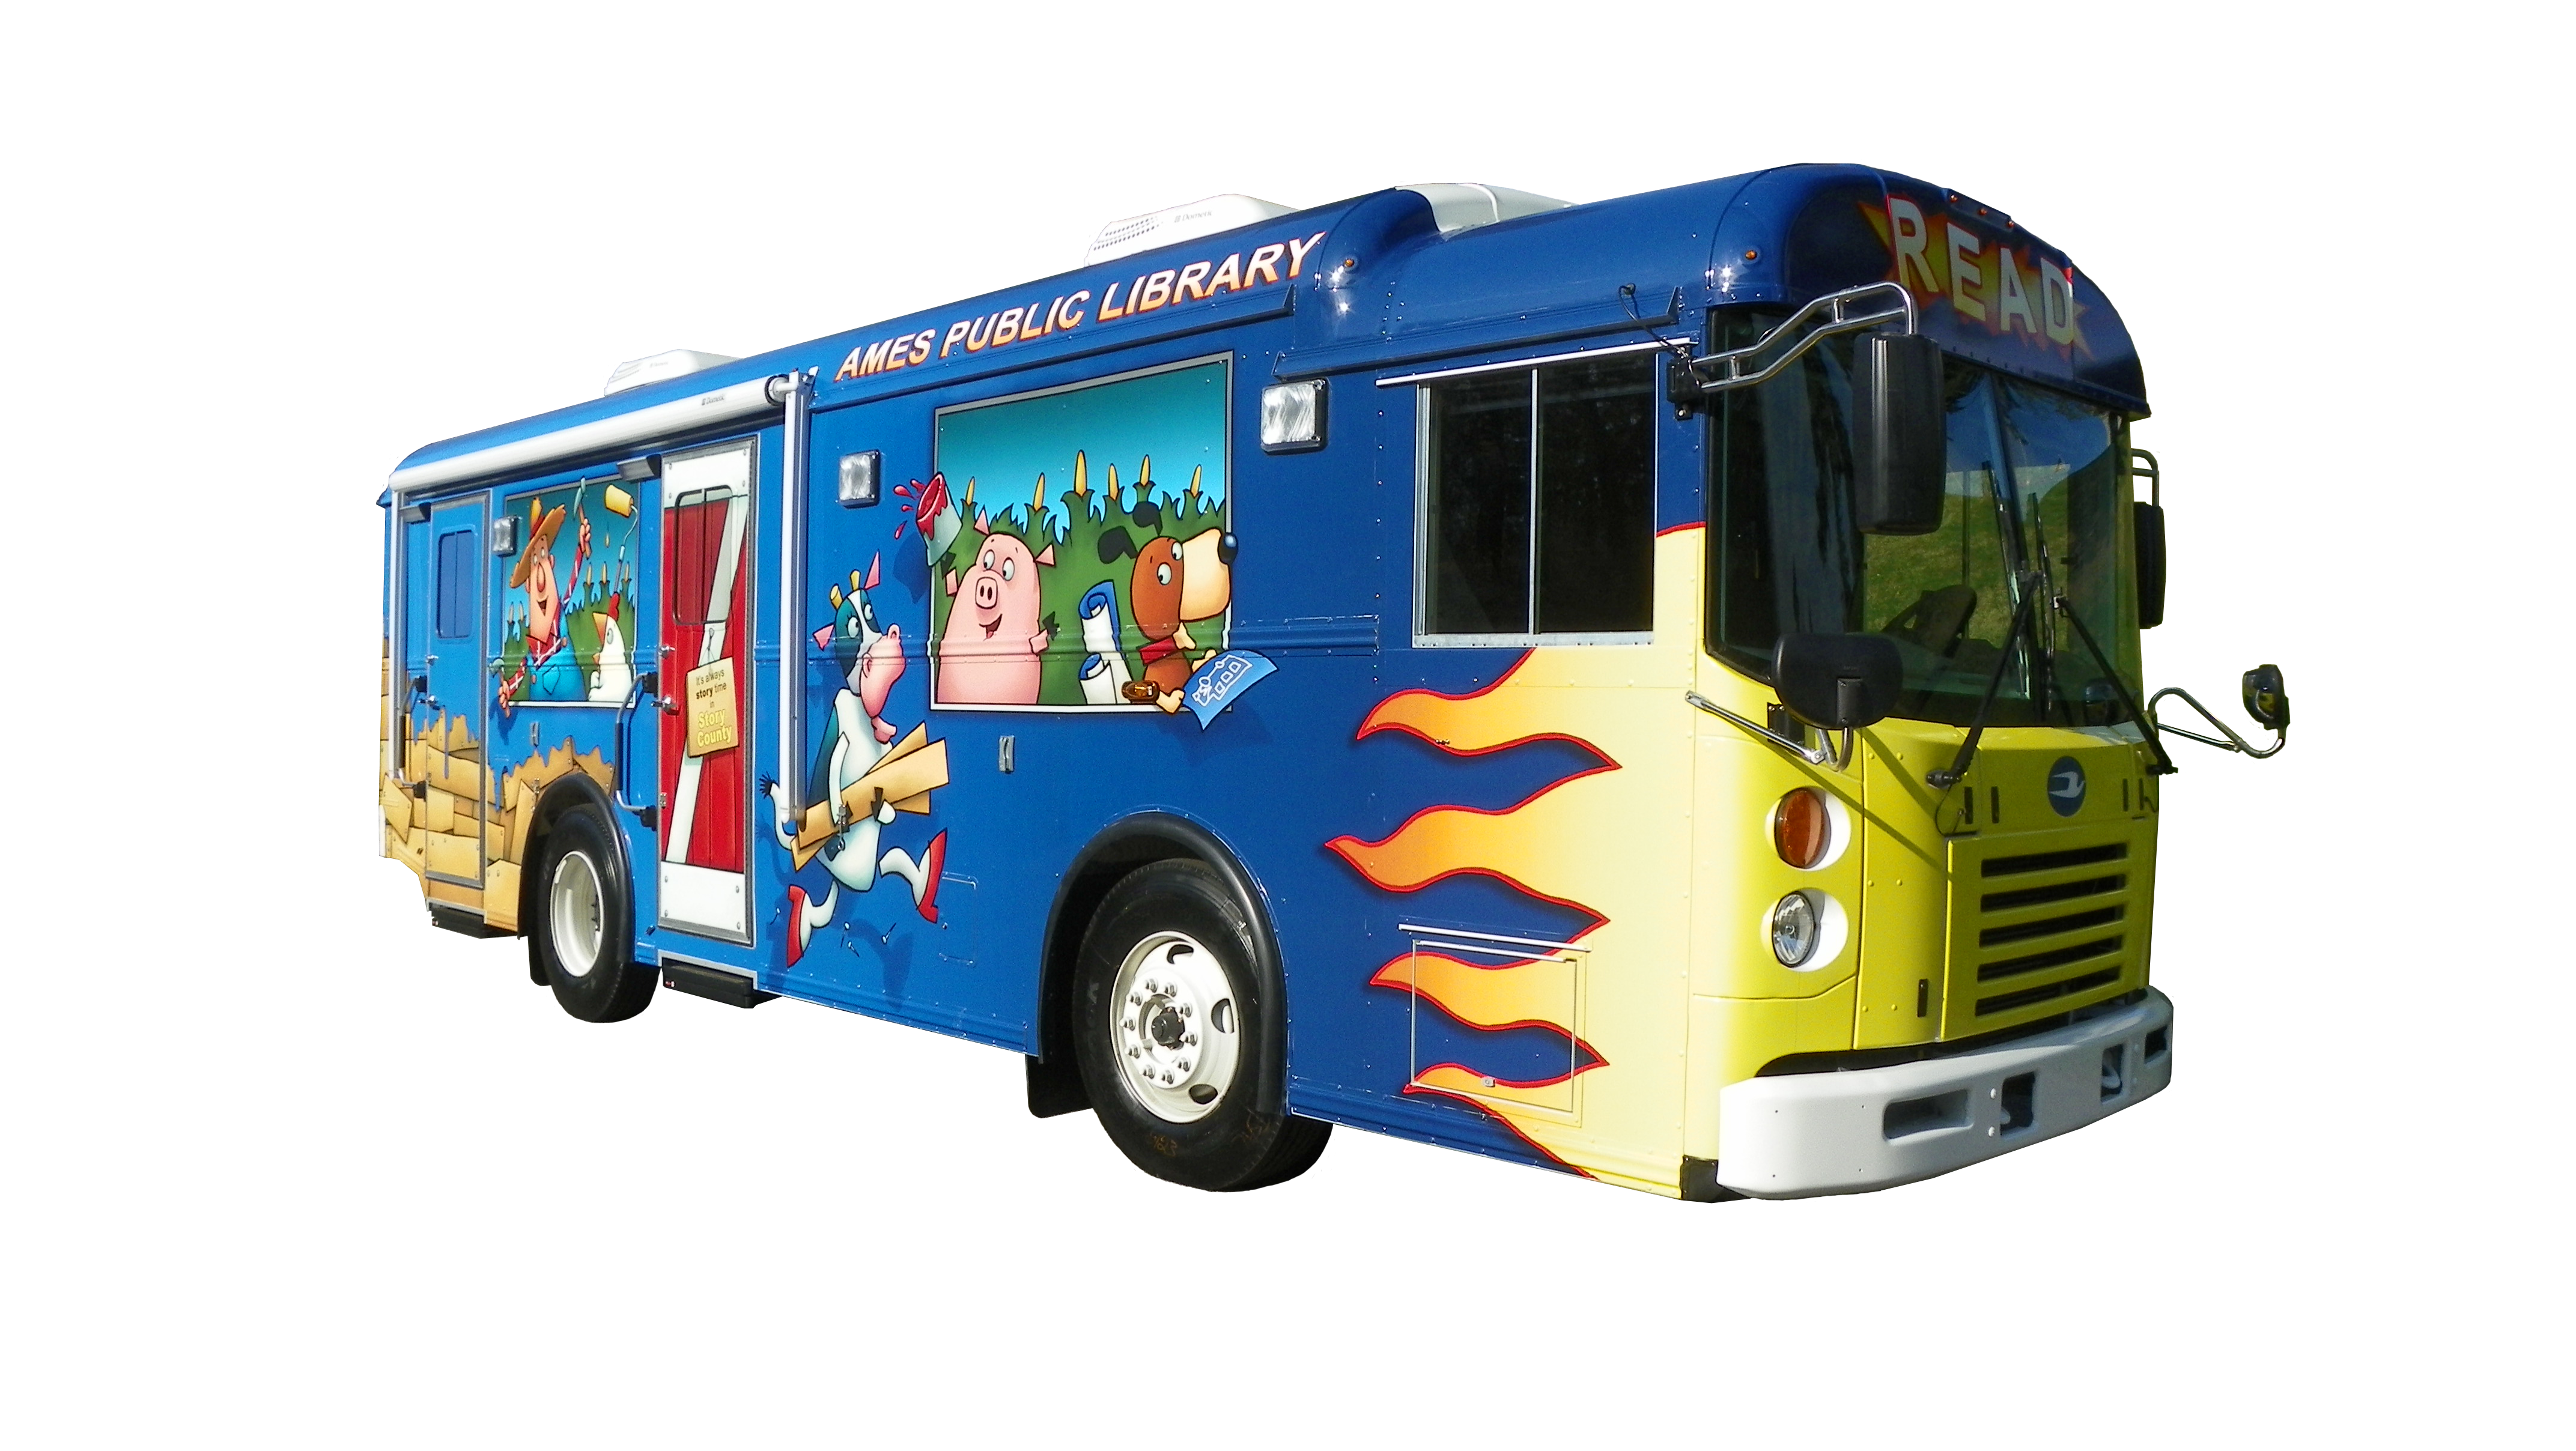 Photo of Ames Public Library's Bookmobile